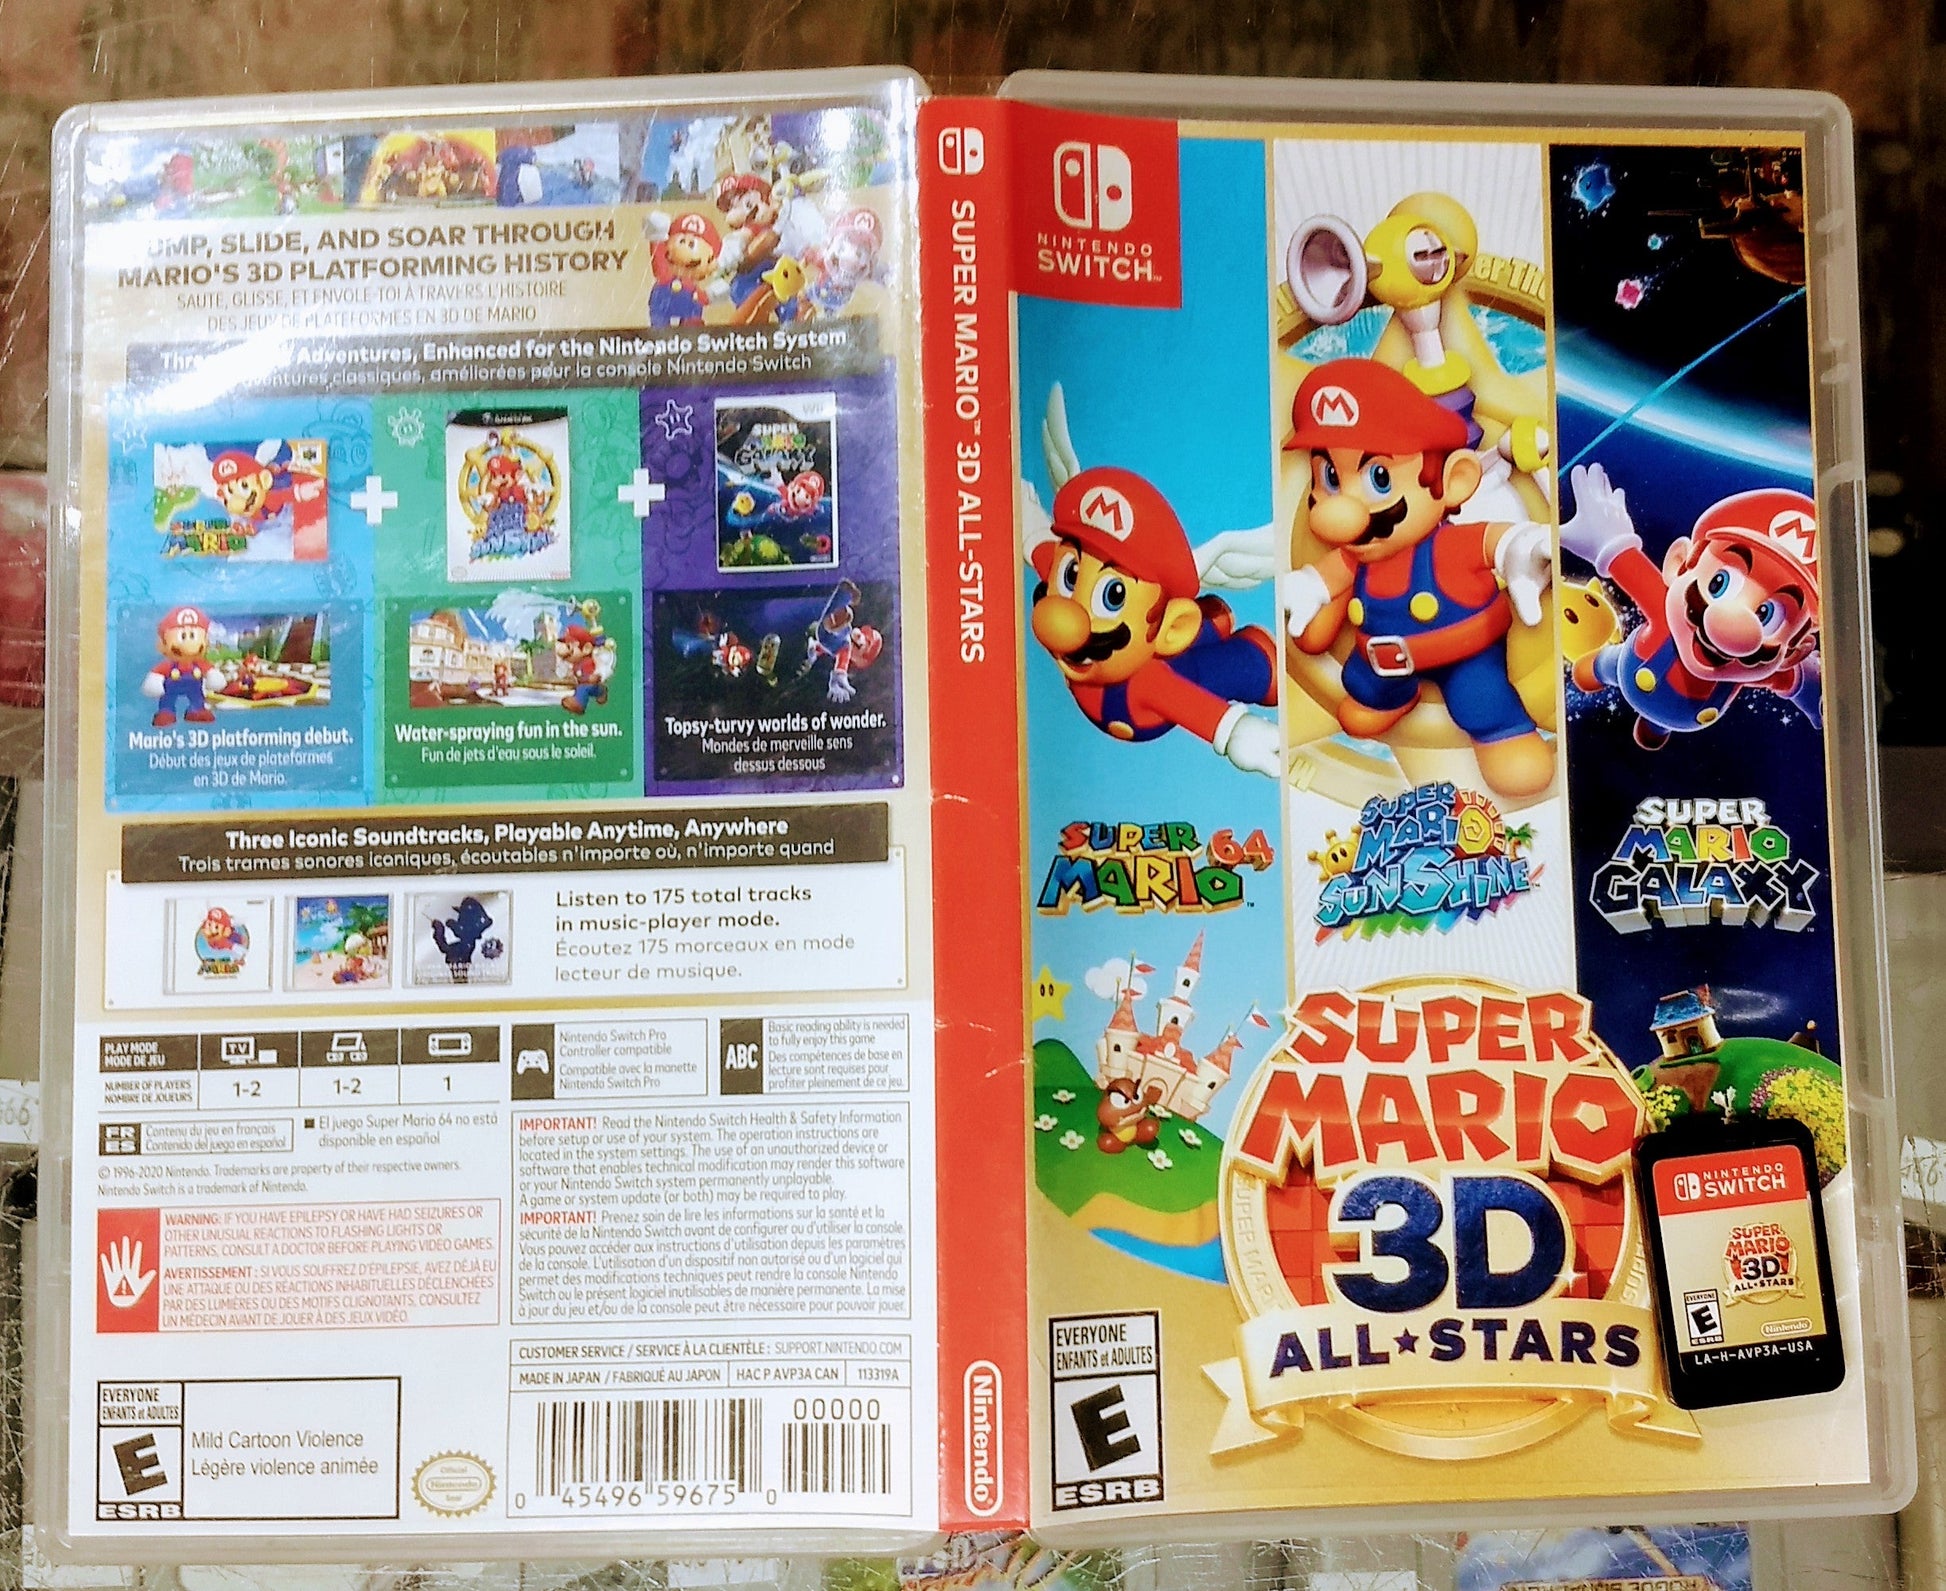 SUPER MARIO 3D ALL-STARS (NINTENDO SWITCH) - jeux video game-x